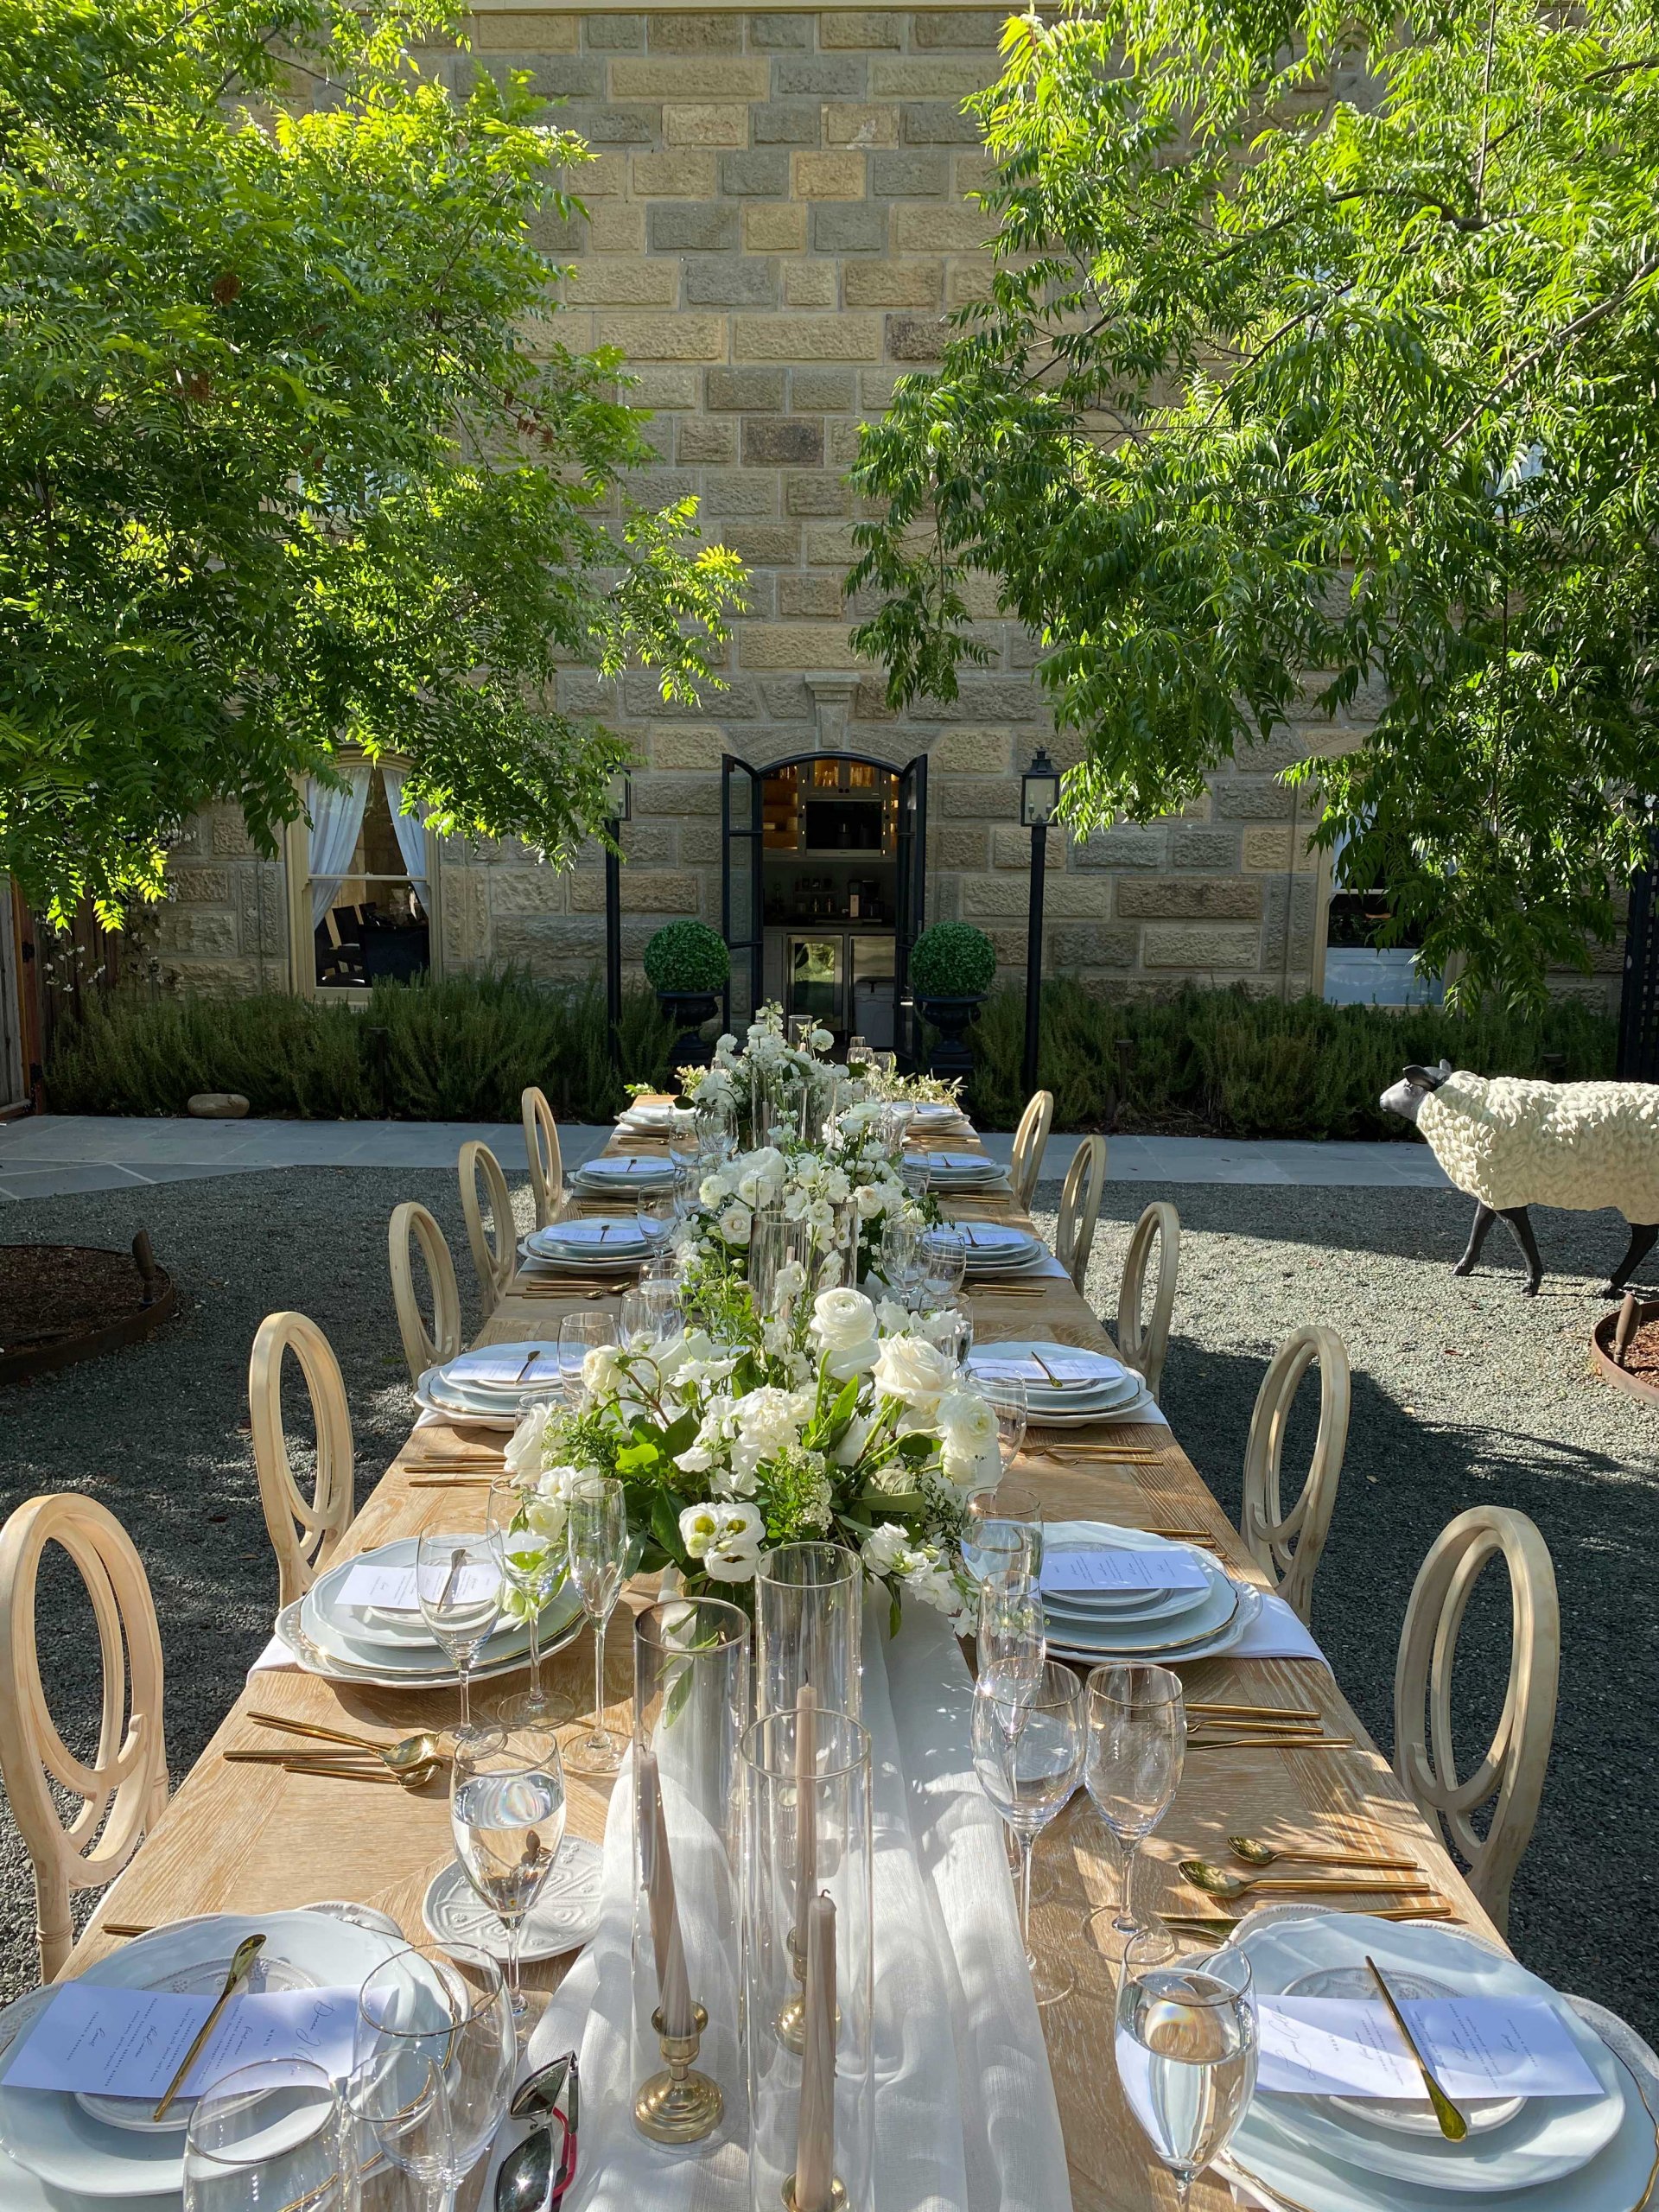 Image of a table set for a wedding party